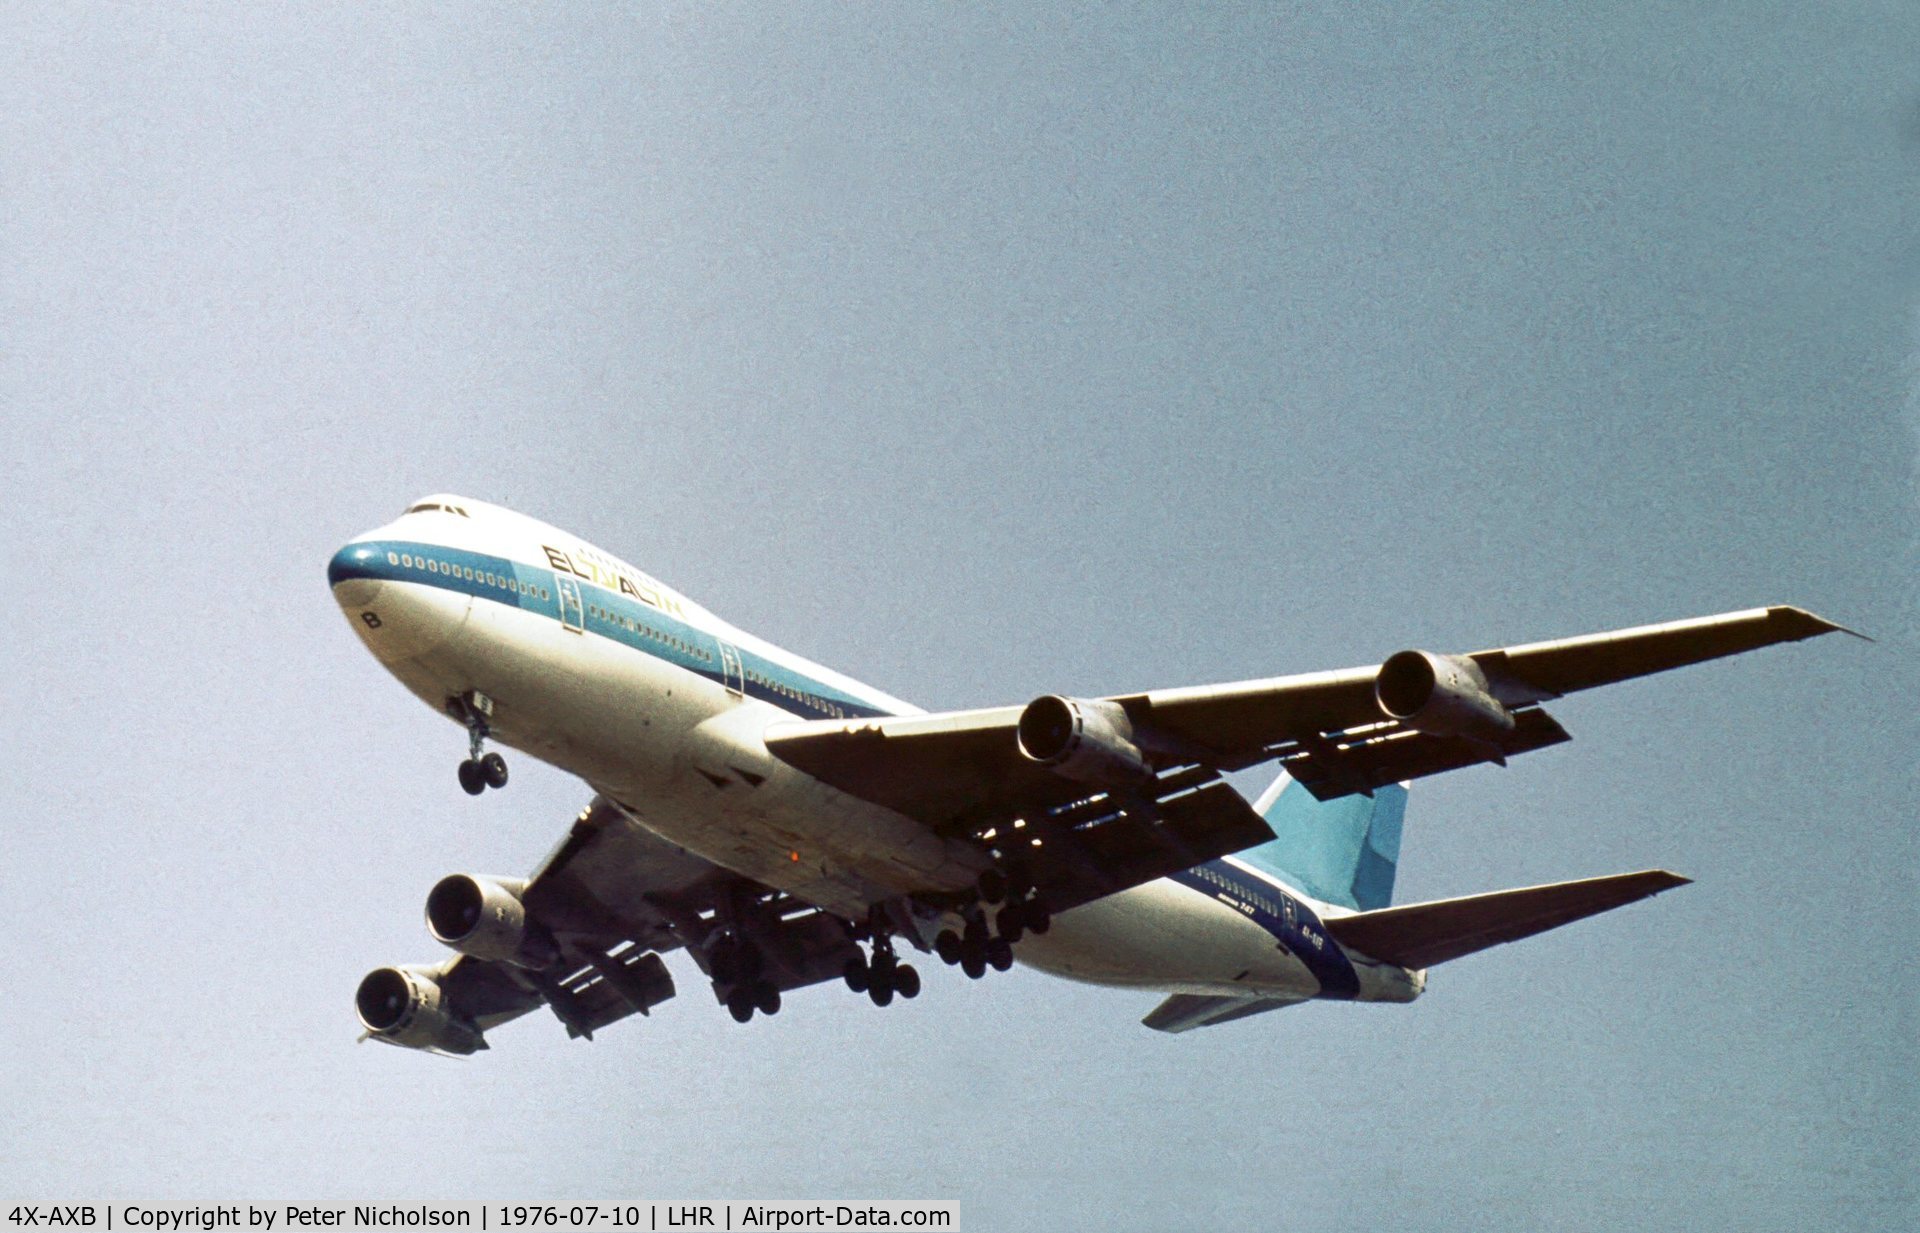 4X-AXB, 1971 Boeing 747-258B C/N 20274, Boeing 747-258B of El Al on fianl approach to London Heathrow in the Summer of 1976.